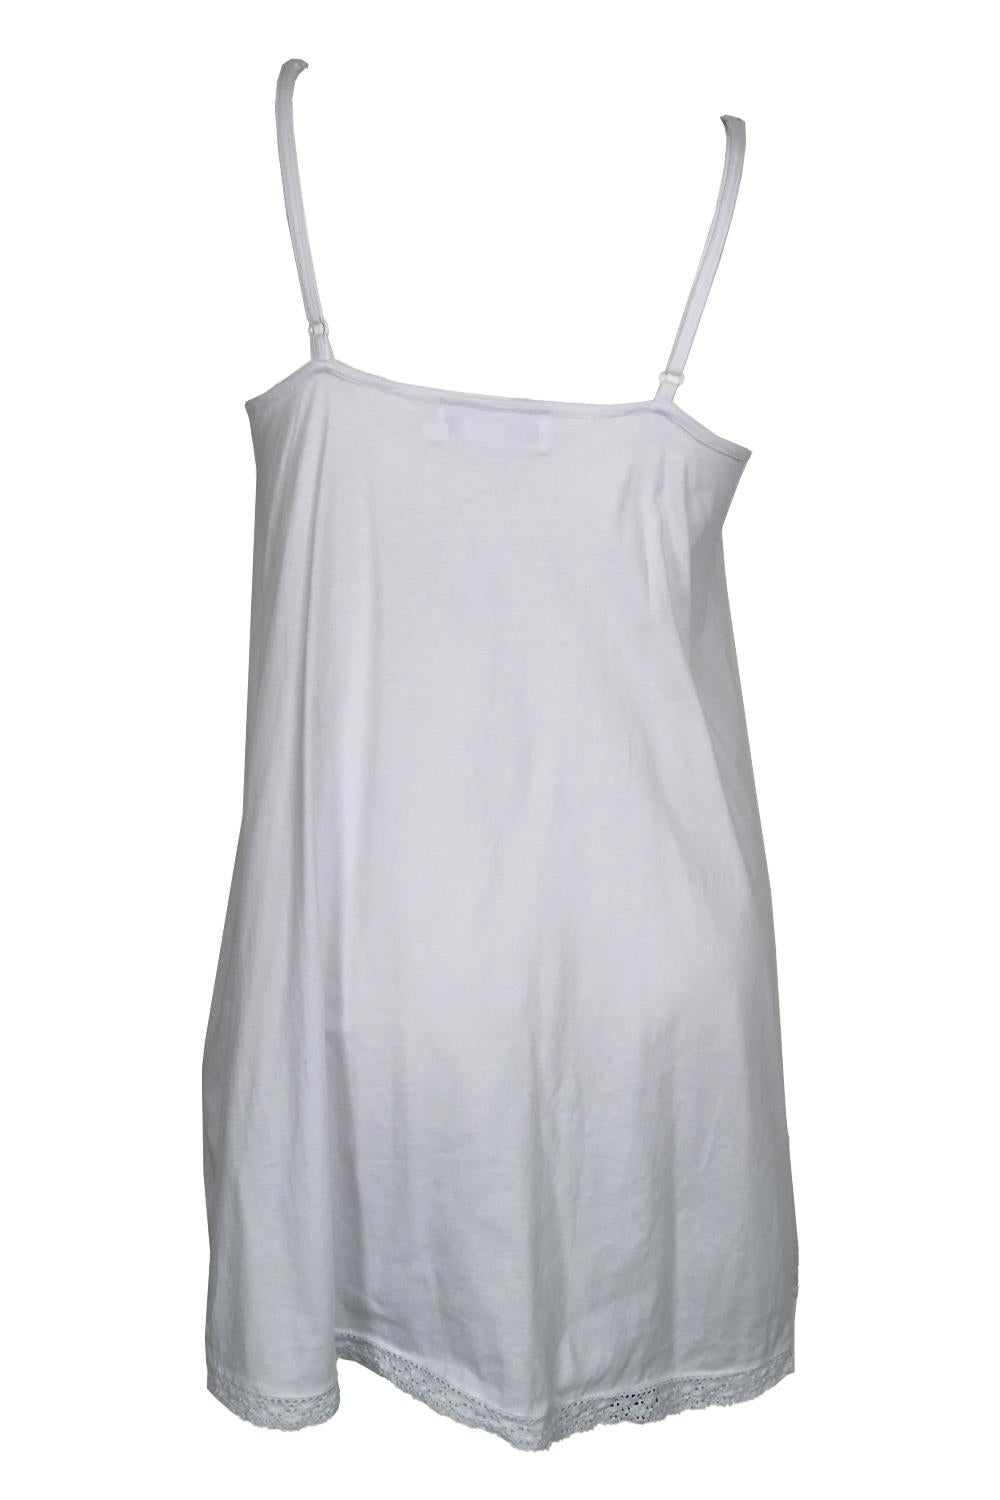 Victoriana Lucy Short Nightgown 457 White – My Top Drawer